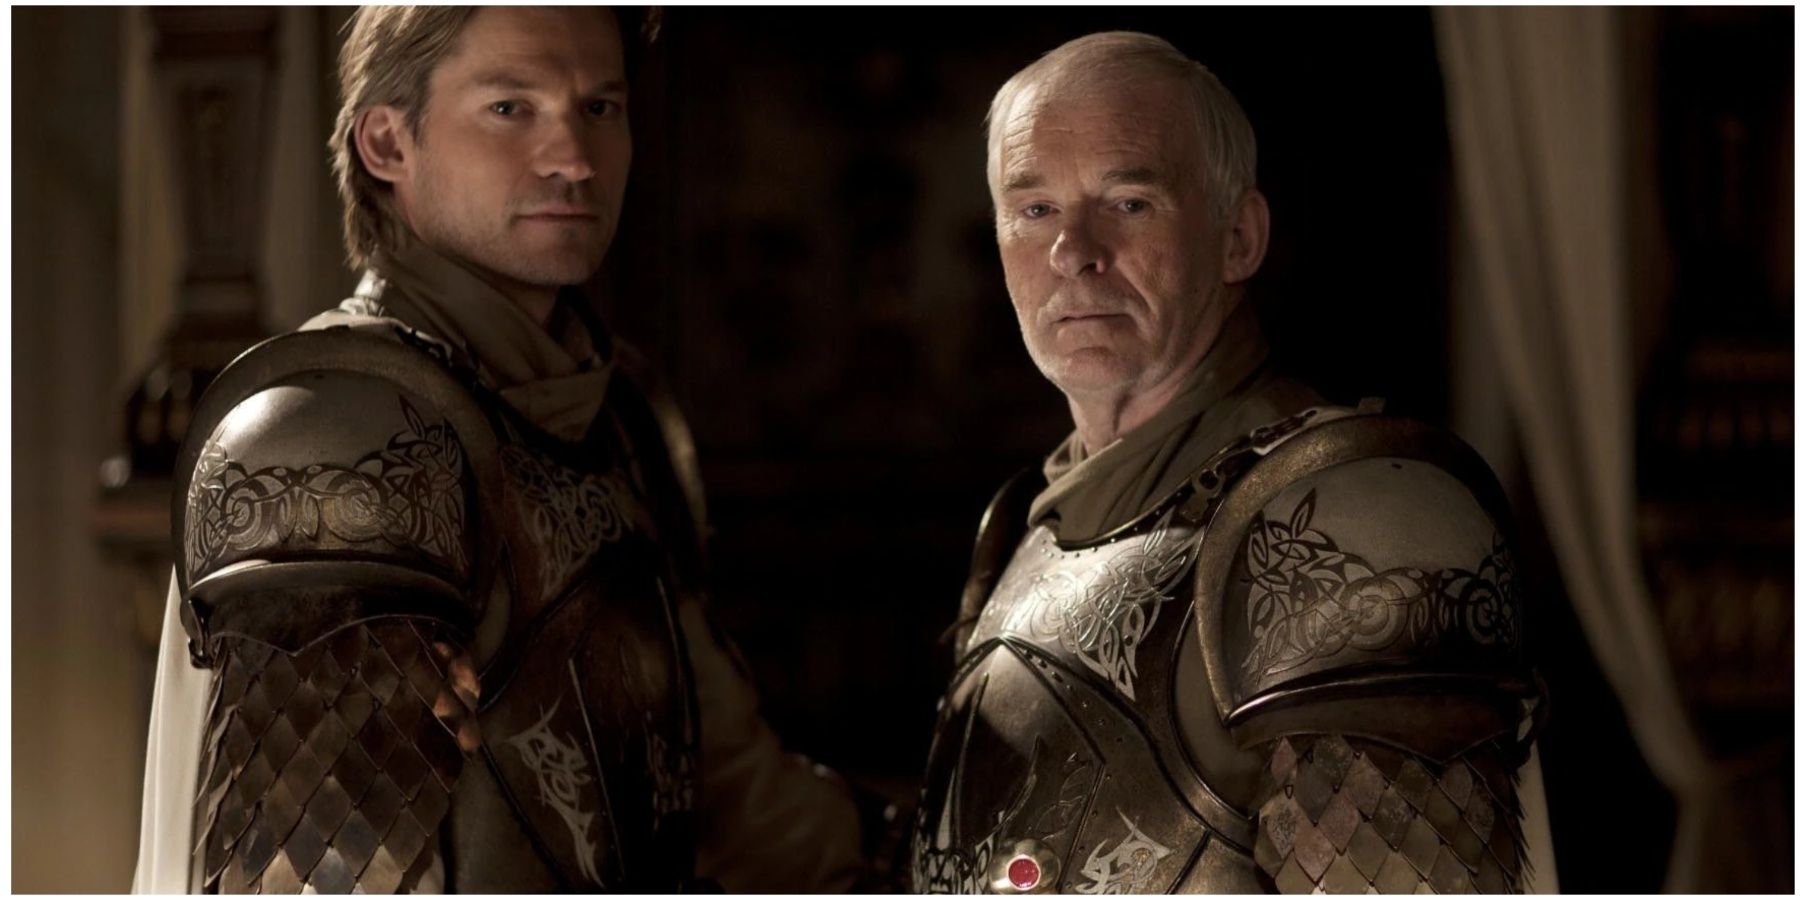 Ser Jaime Lannister and Ser Barristan Selmy in Game of Thrones.